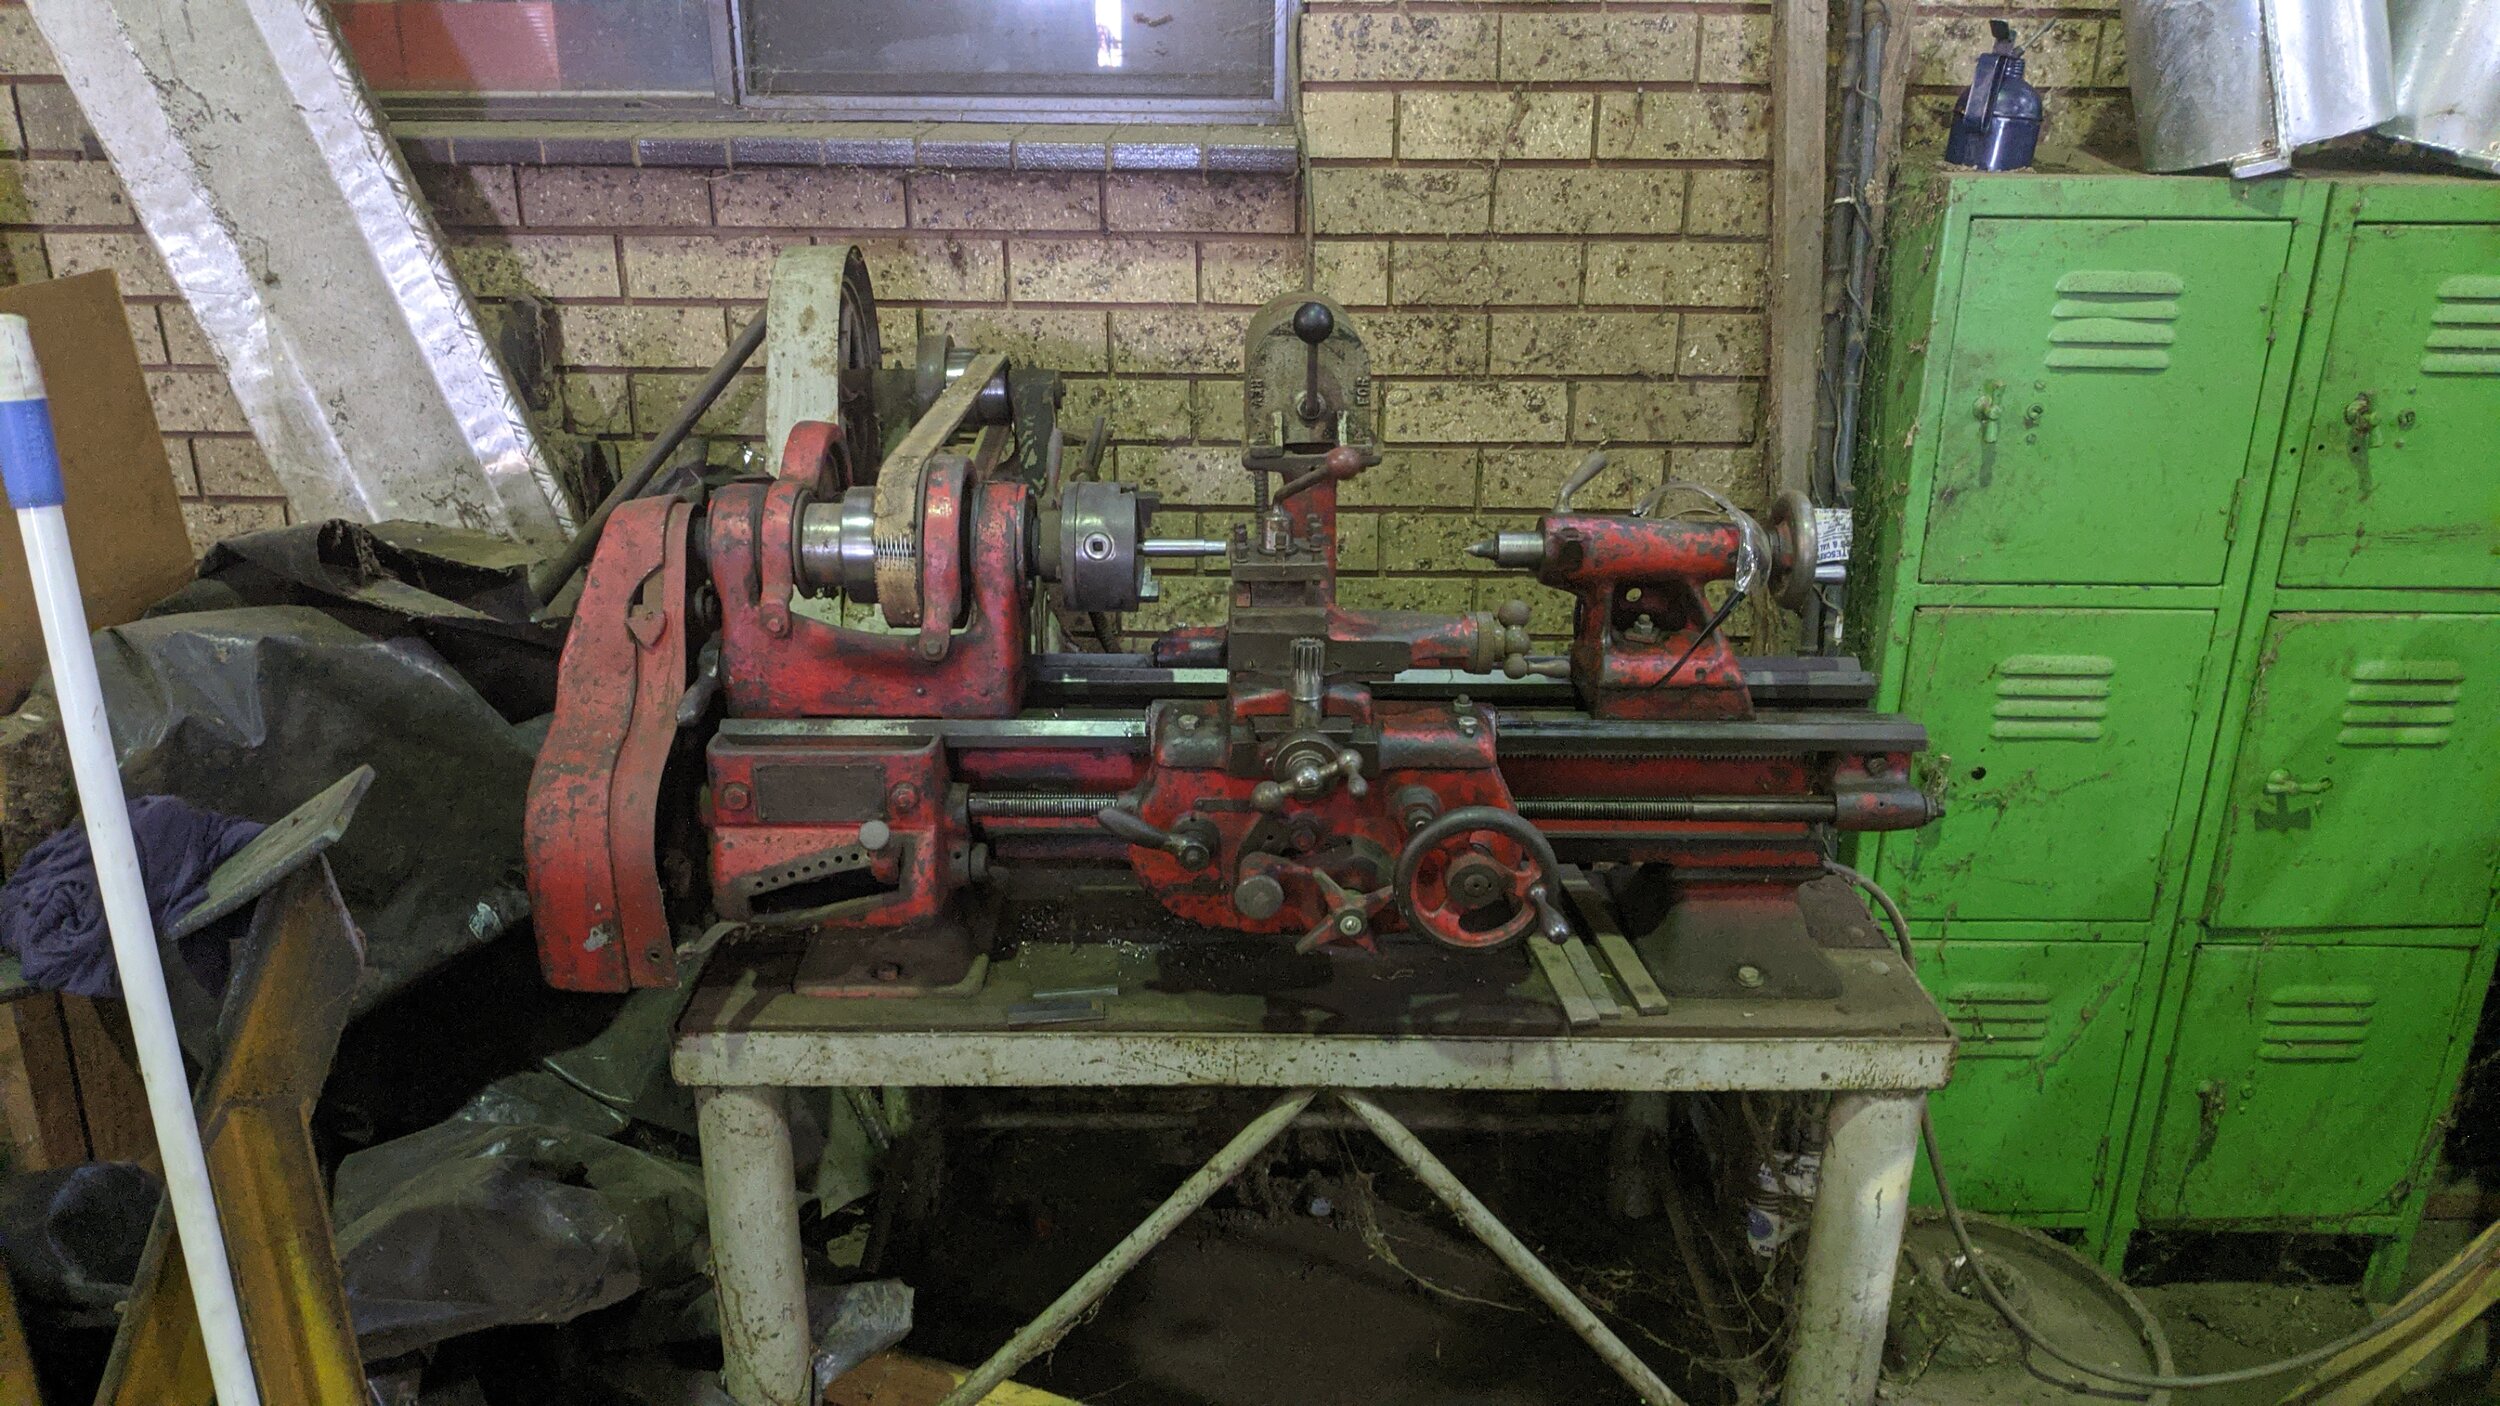  Duncan Bate’s first lathe from 1949 